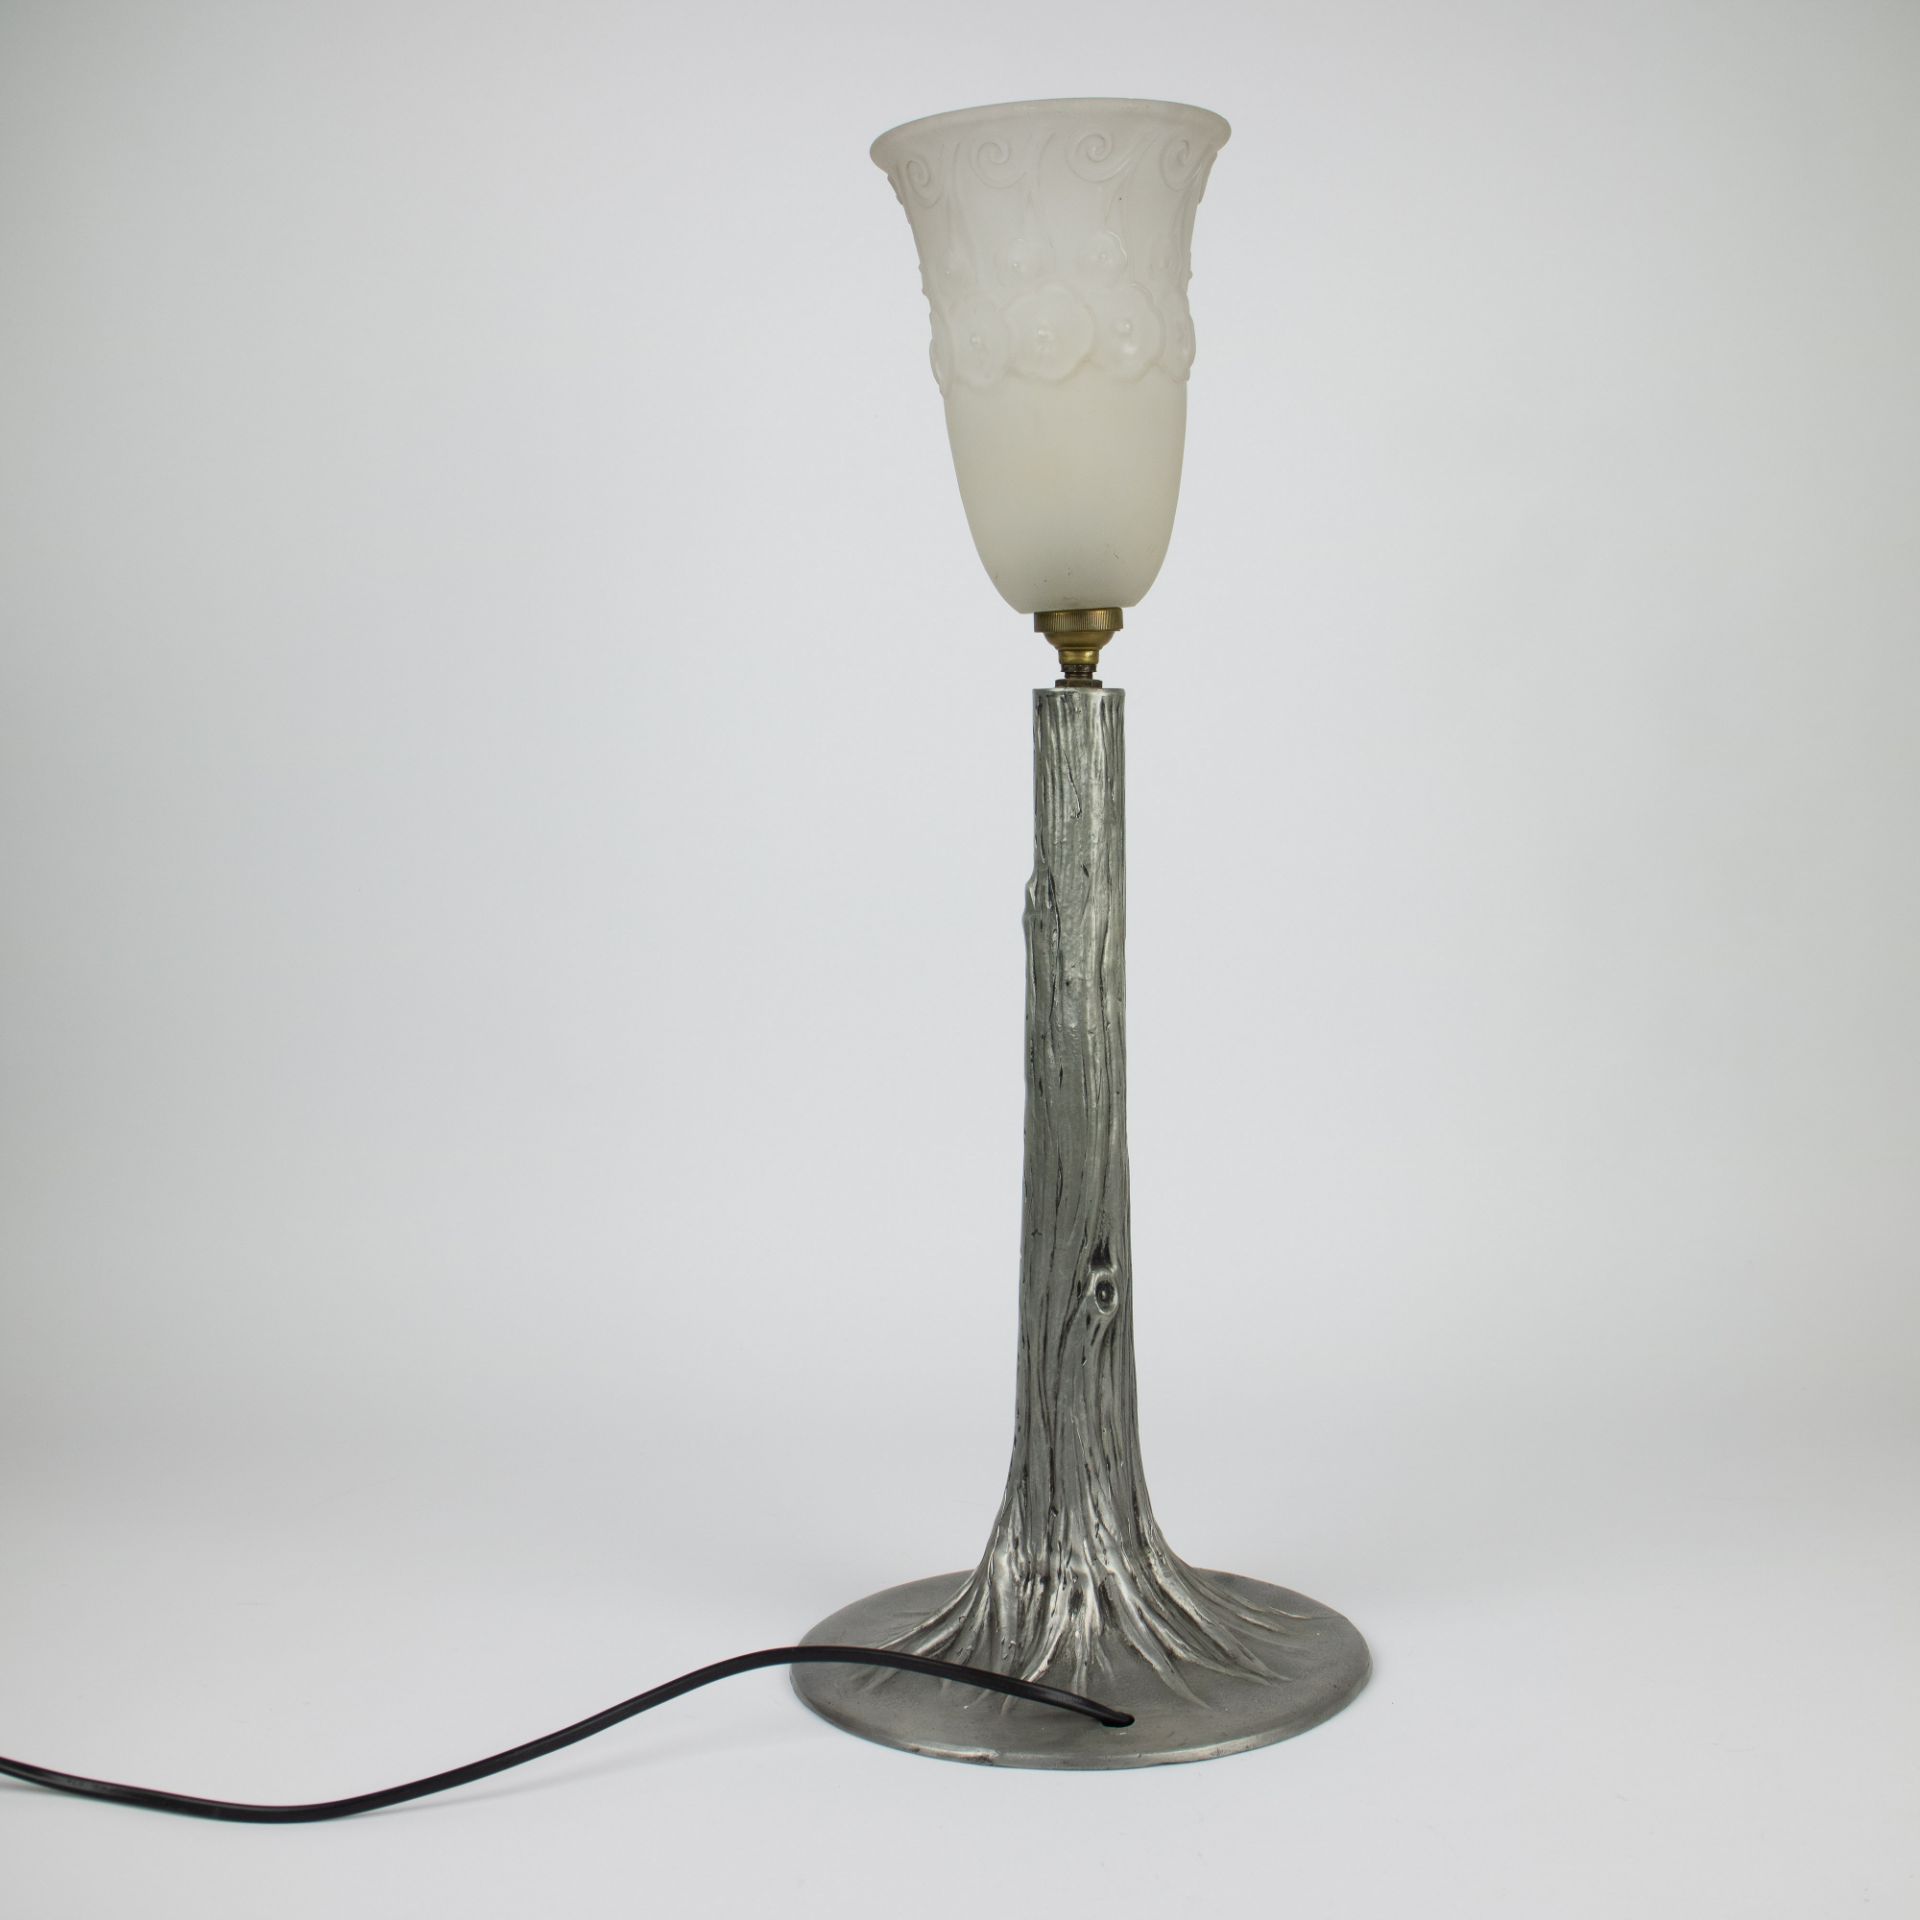 Muller Frères table lamp in silver plated bronze - Image 3 of 4